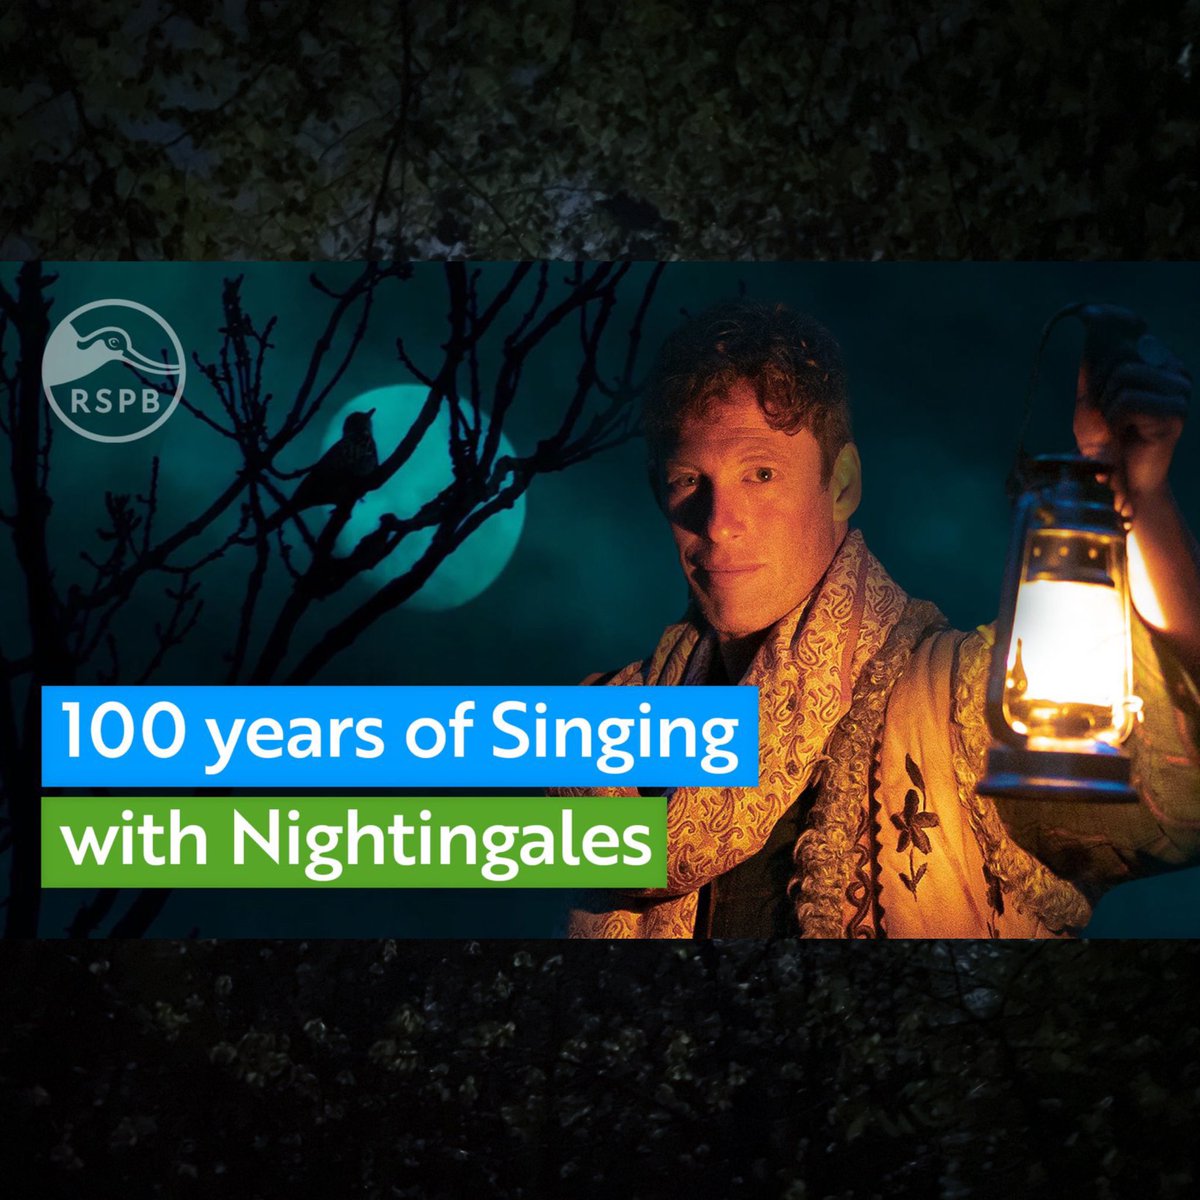 This Sunday May 19th at 11pm in collaboration with @Natures_Voice and @KneppWilding 11pm live on the RSPBs YouTube channel nightingales.live 100 years ago to the night the BBC aired their first ever outside broadcast – a nightingale in duet with a cellist.